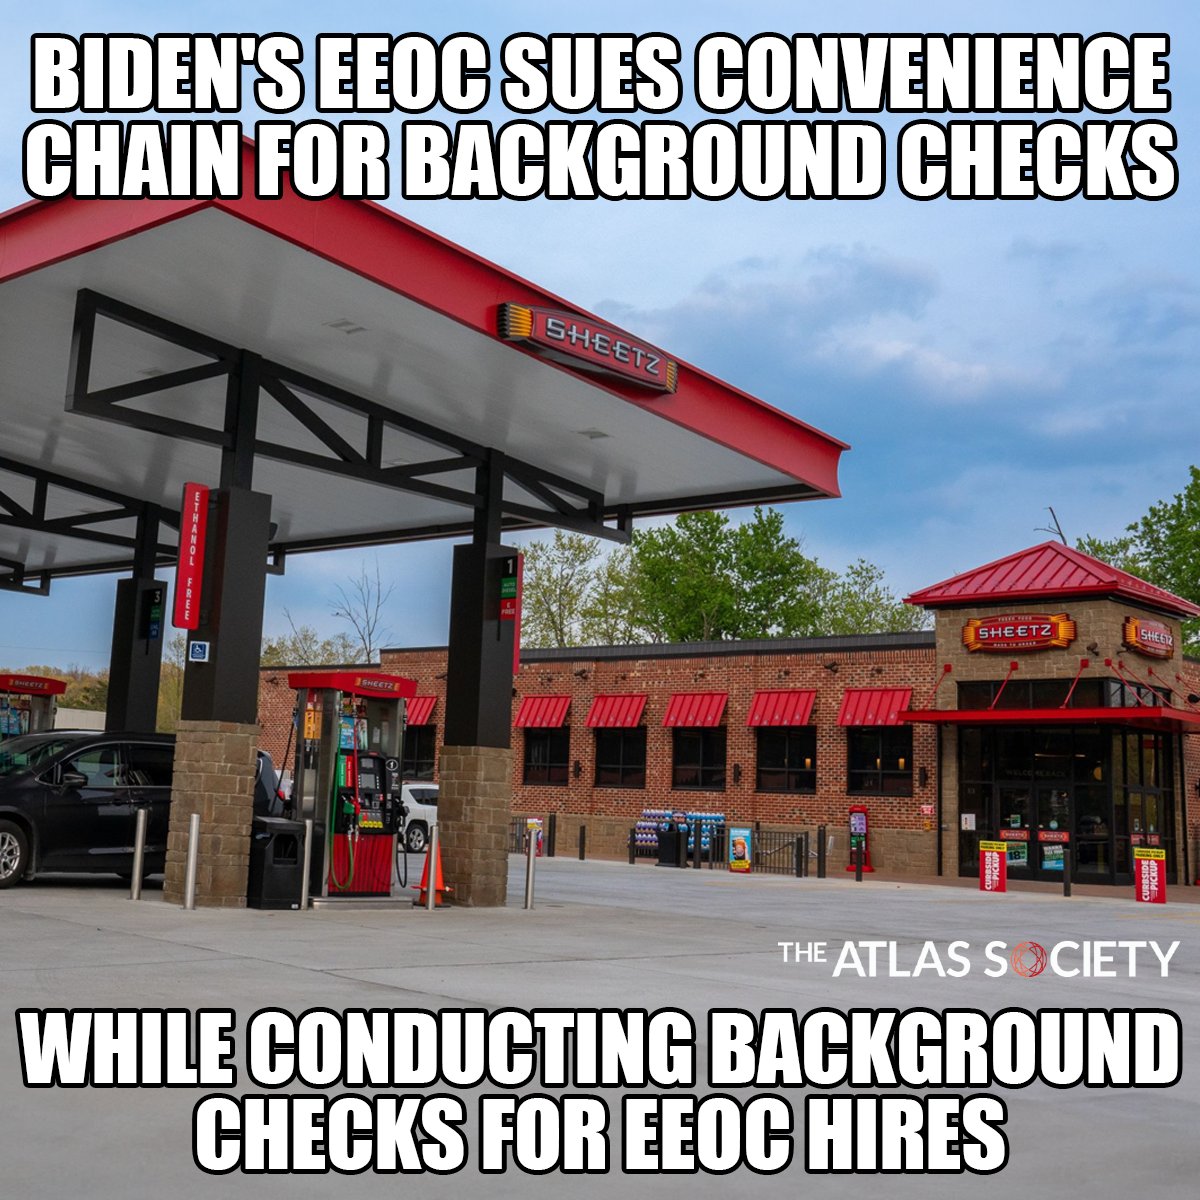 So the same bureaucracy that REQUIRES criminal background checks, is PUNISHING companies for using background checks? #Reason #Biden #ShrinkGovernment #AynRand